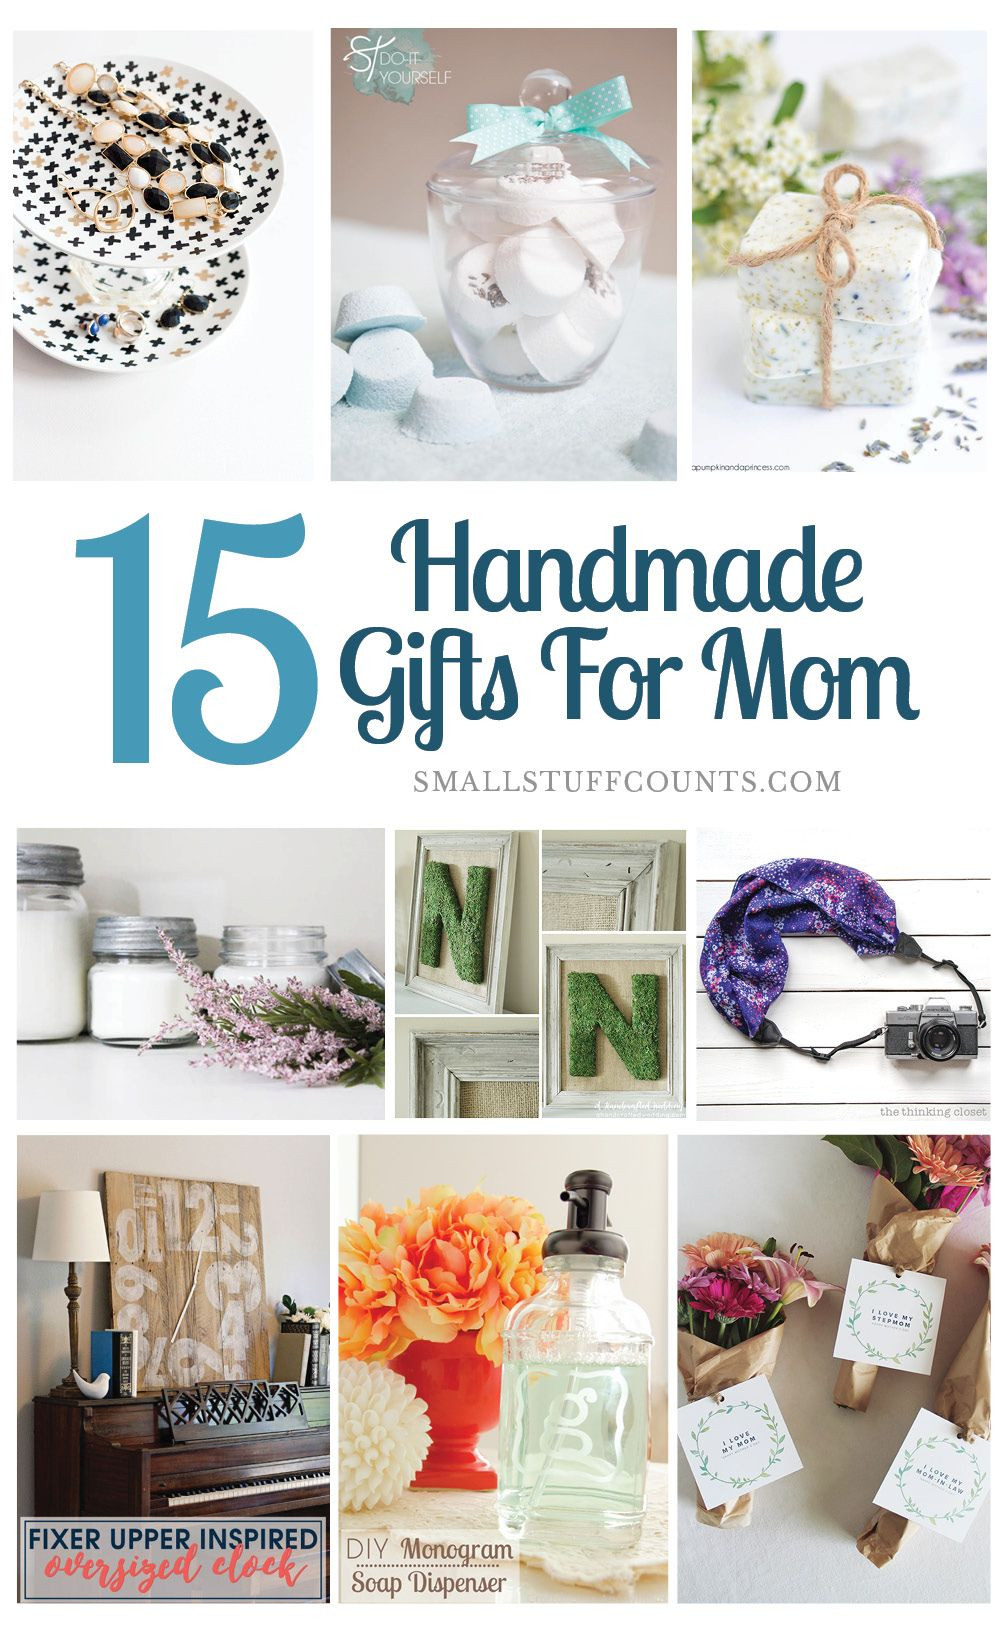 DIY Bday Gifts For Mom
 Beautiful DIY Gift Ideas For Mom crafts